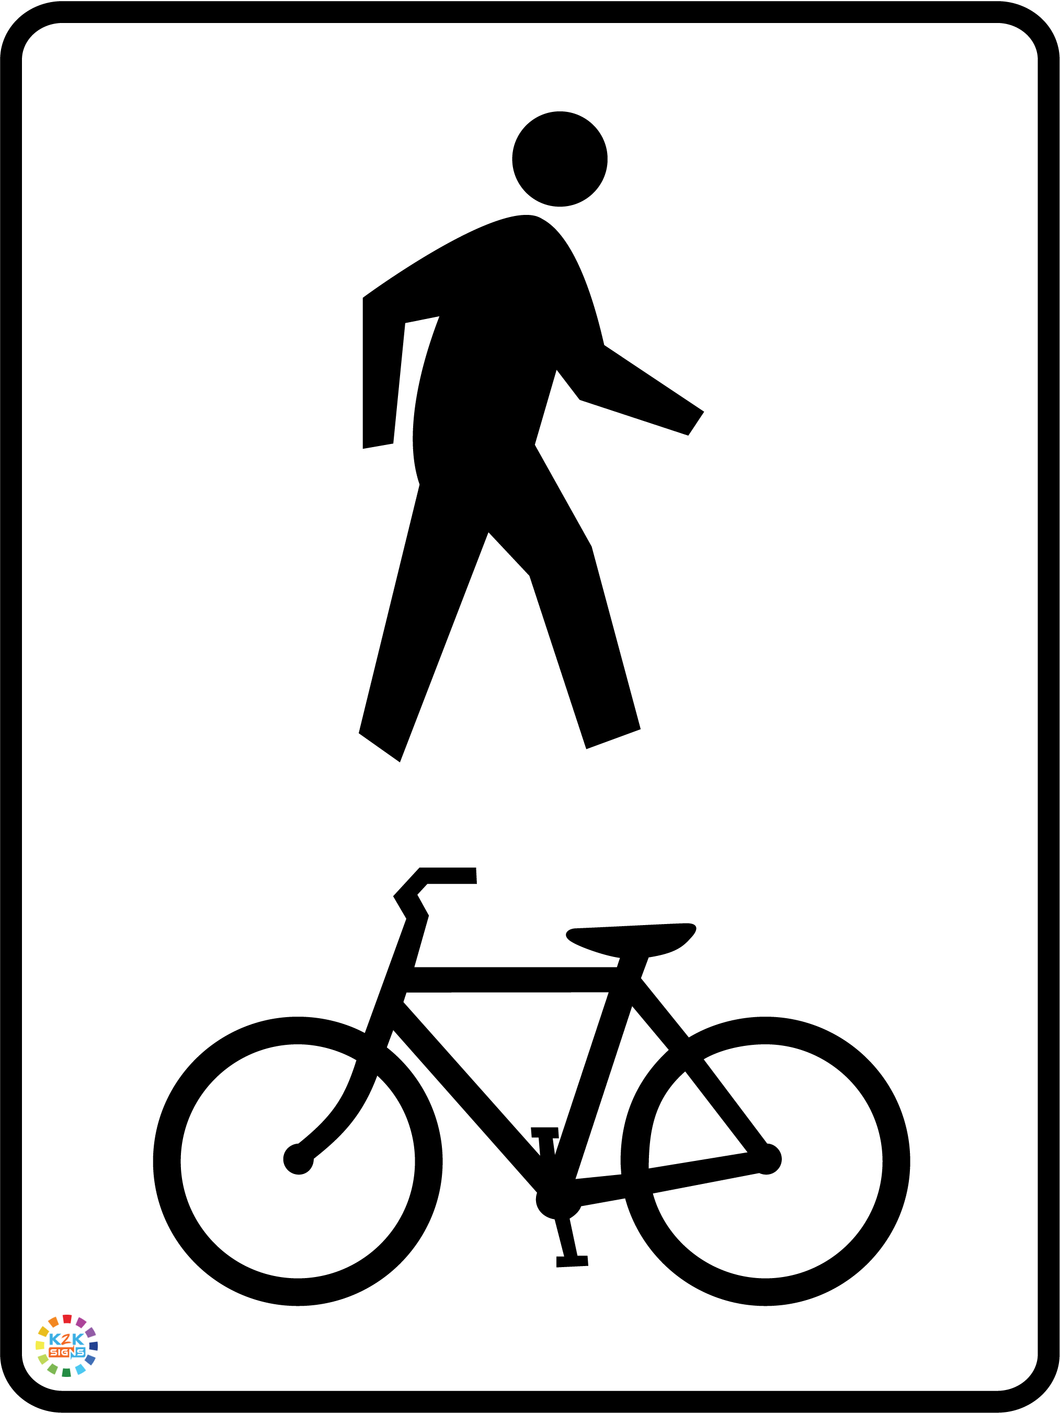 Shared Zone Sign